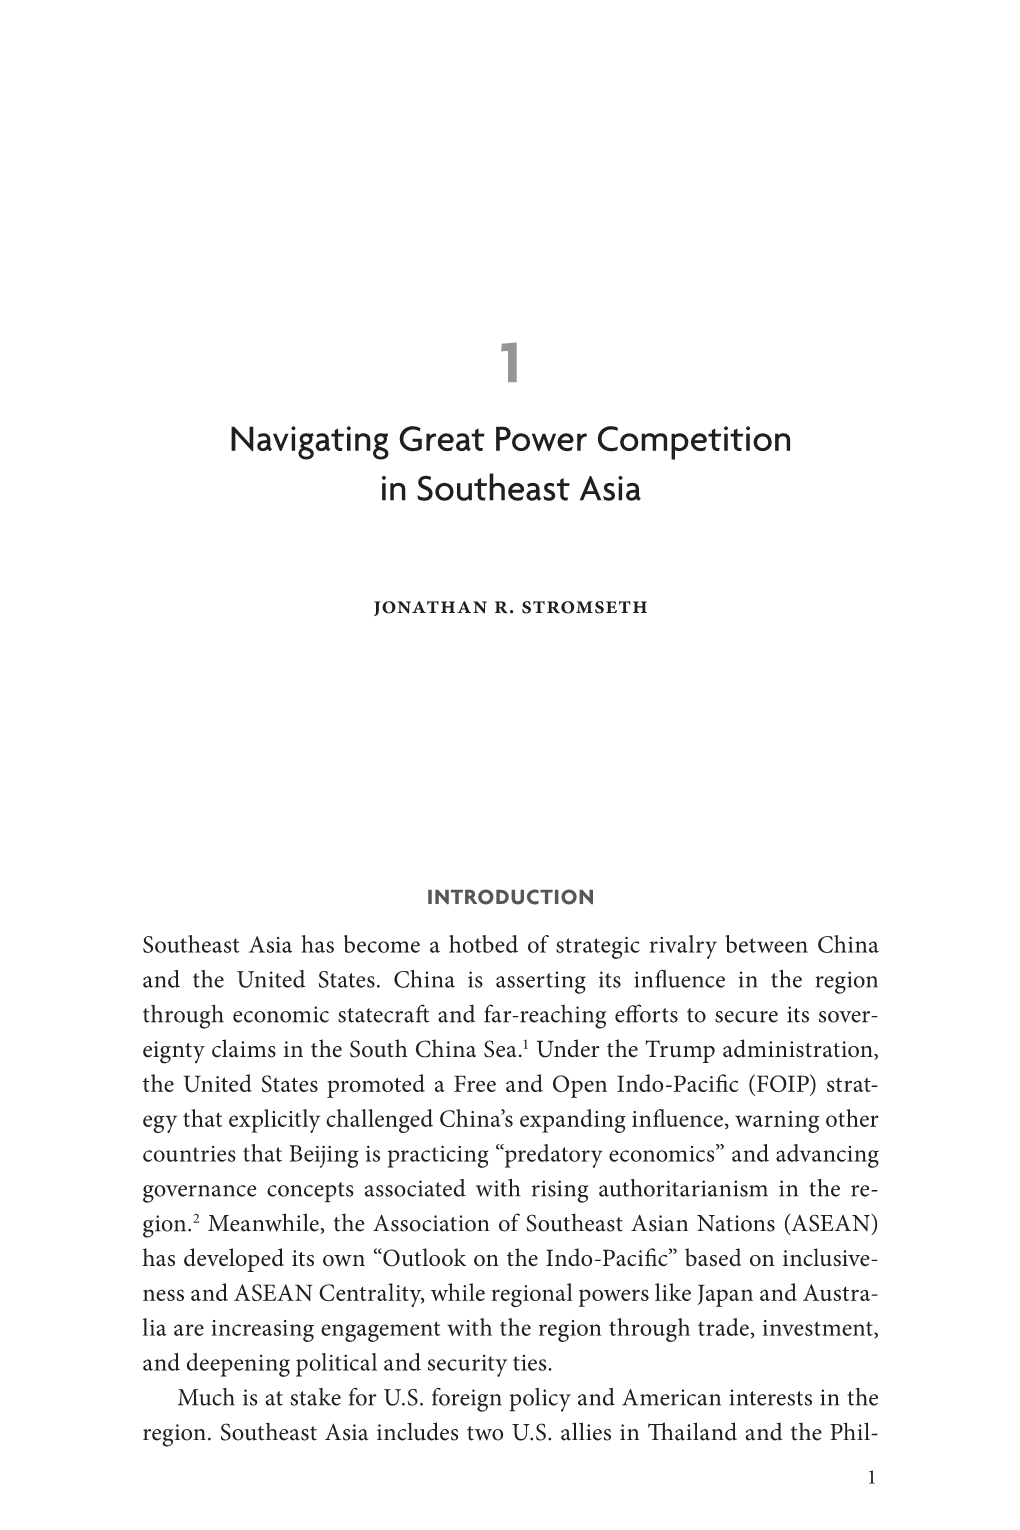 Navigating Great Power Competition in Southeast Asia